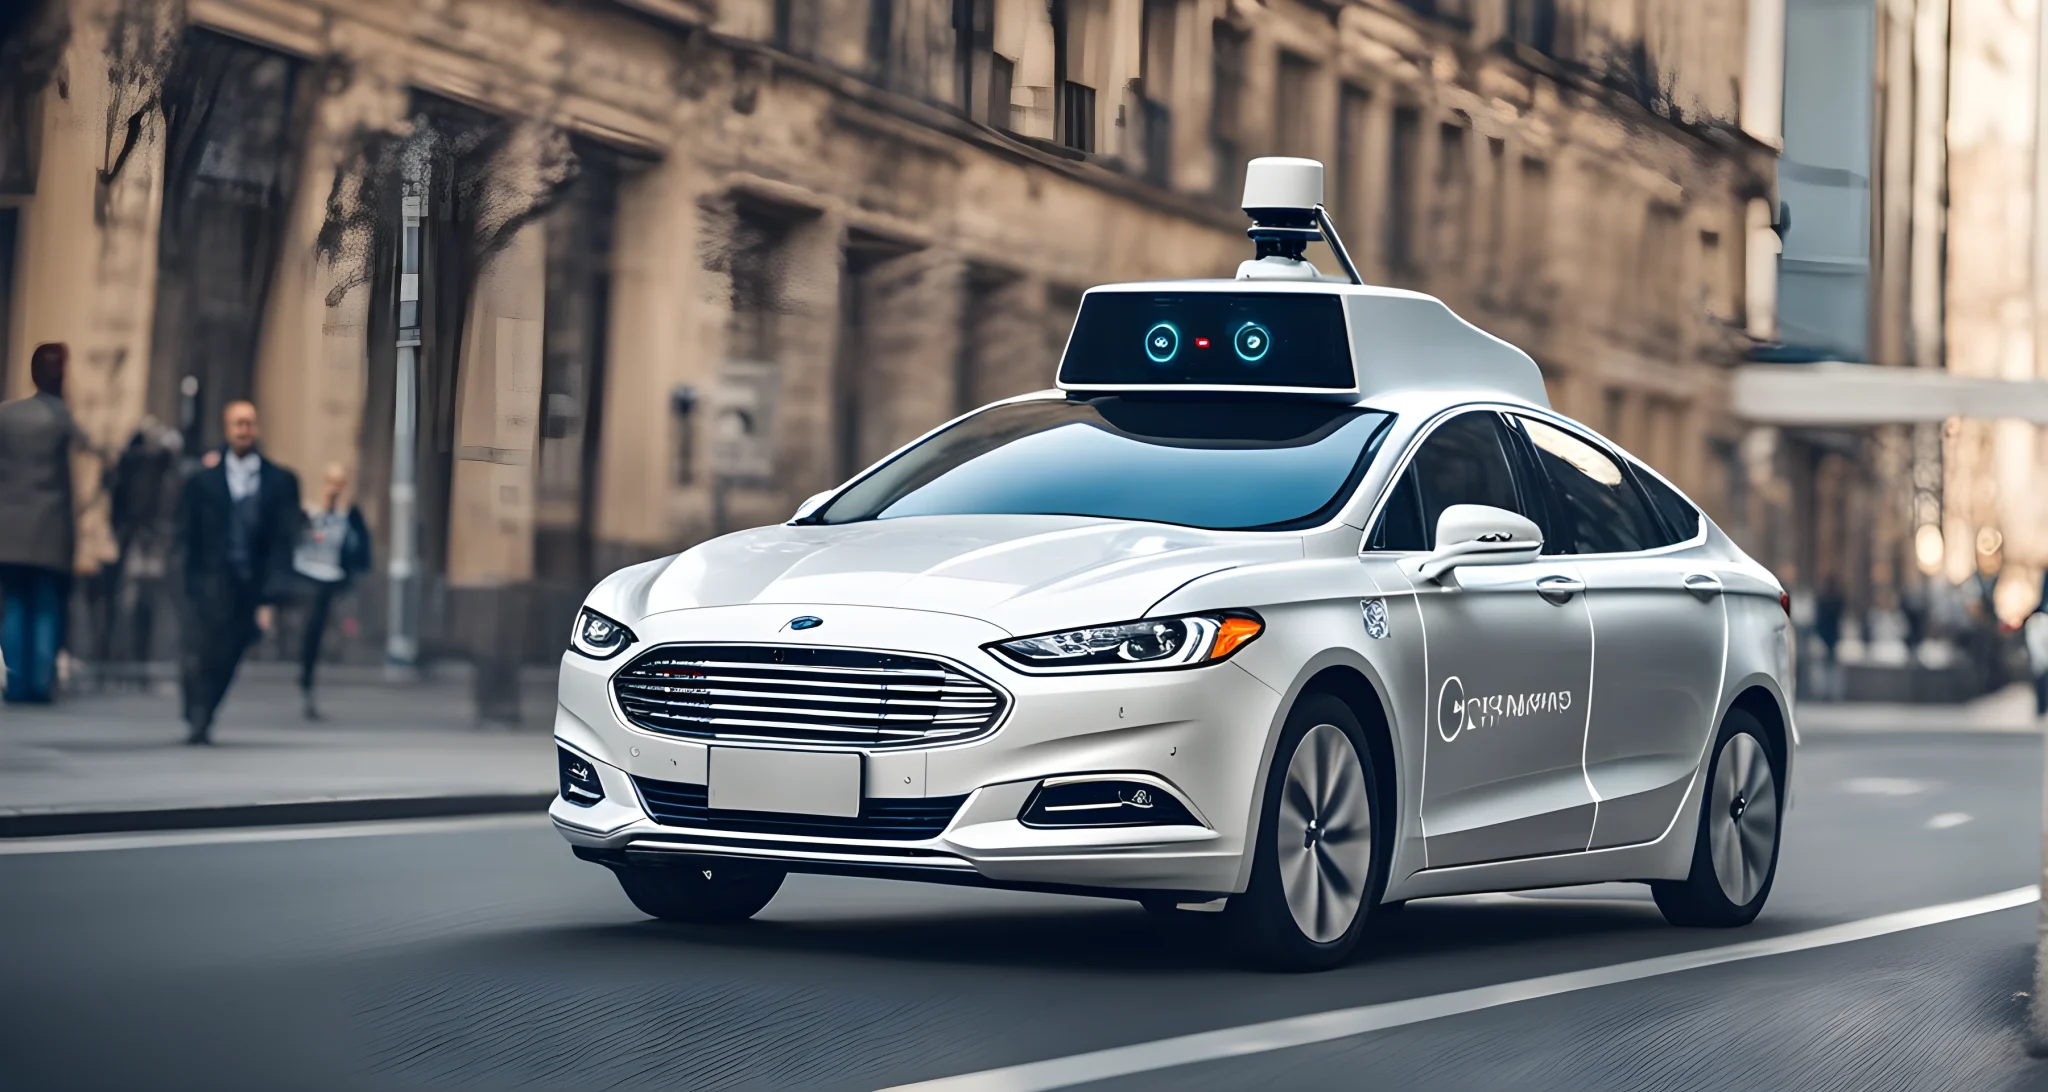 The image shows a self-driving car navigating through a city street, with sensors and cameras mounted on the vehicle's exterior.